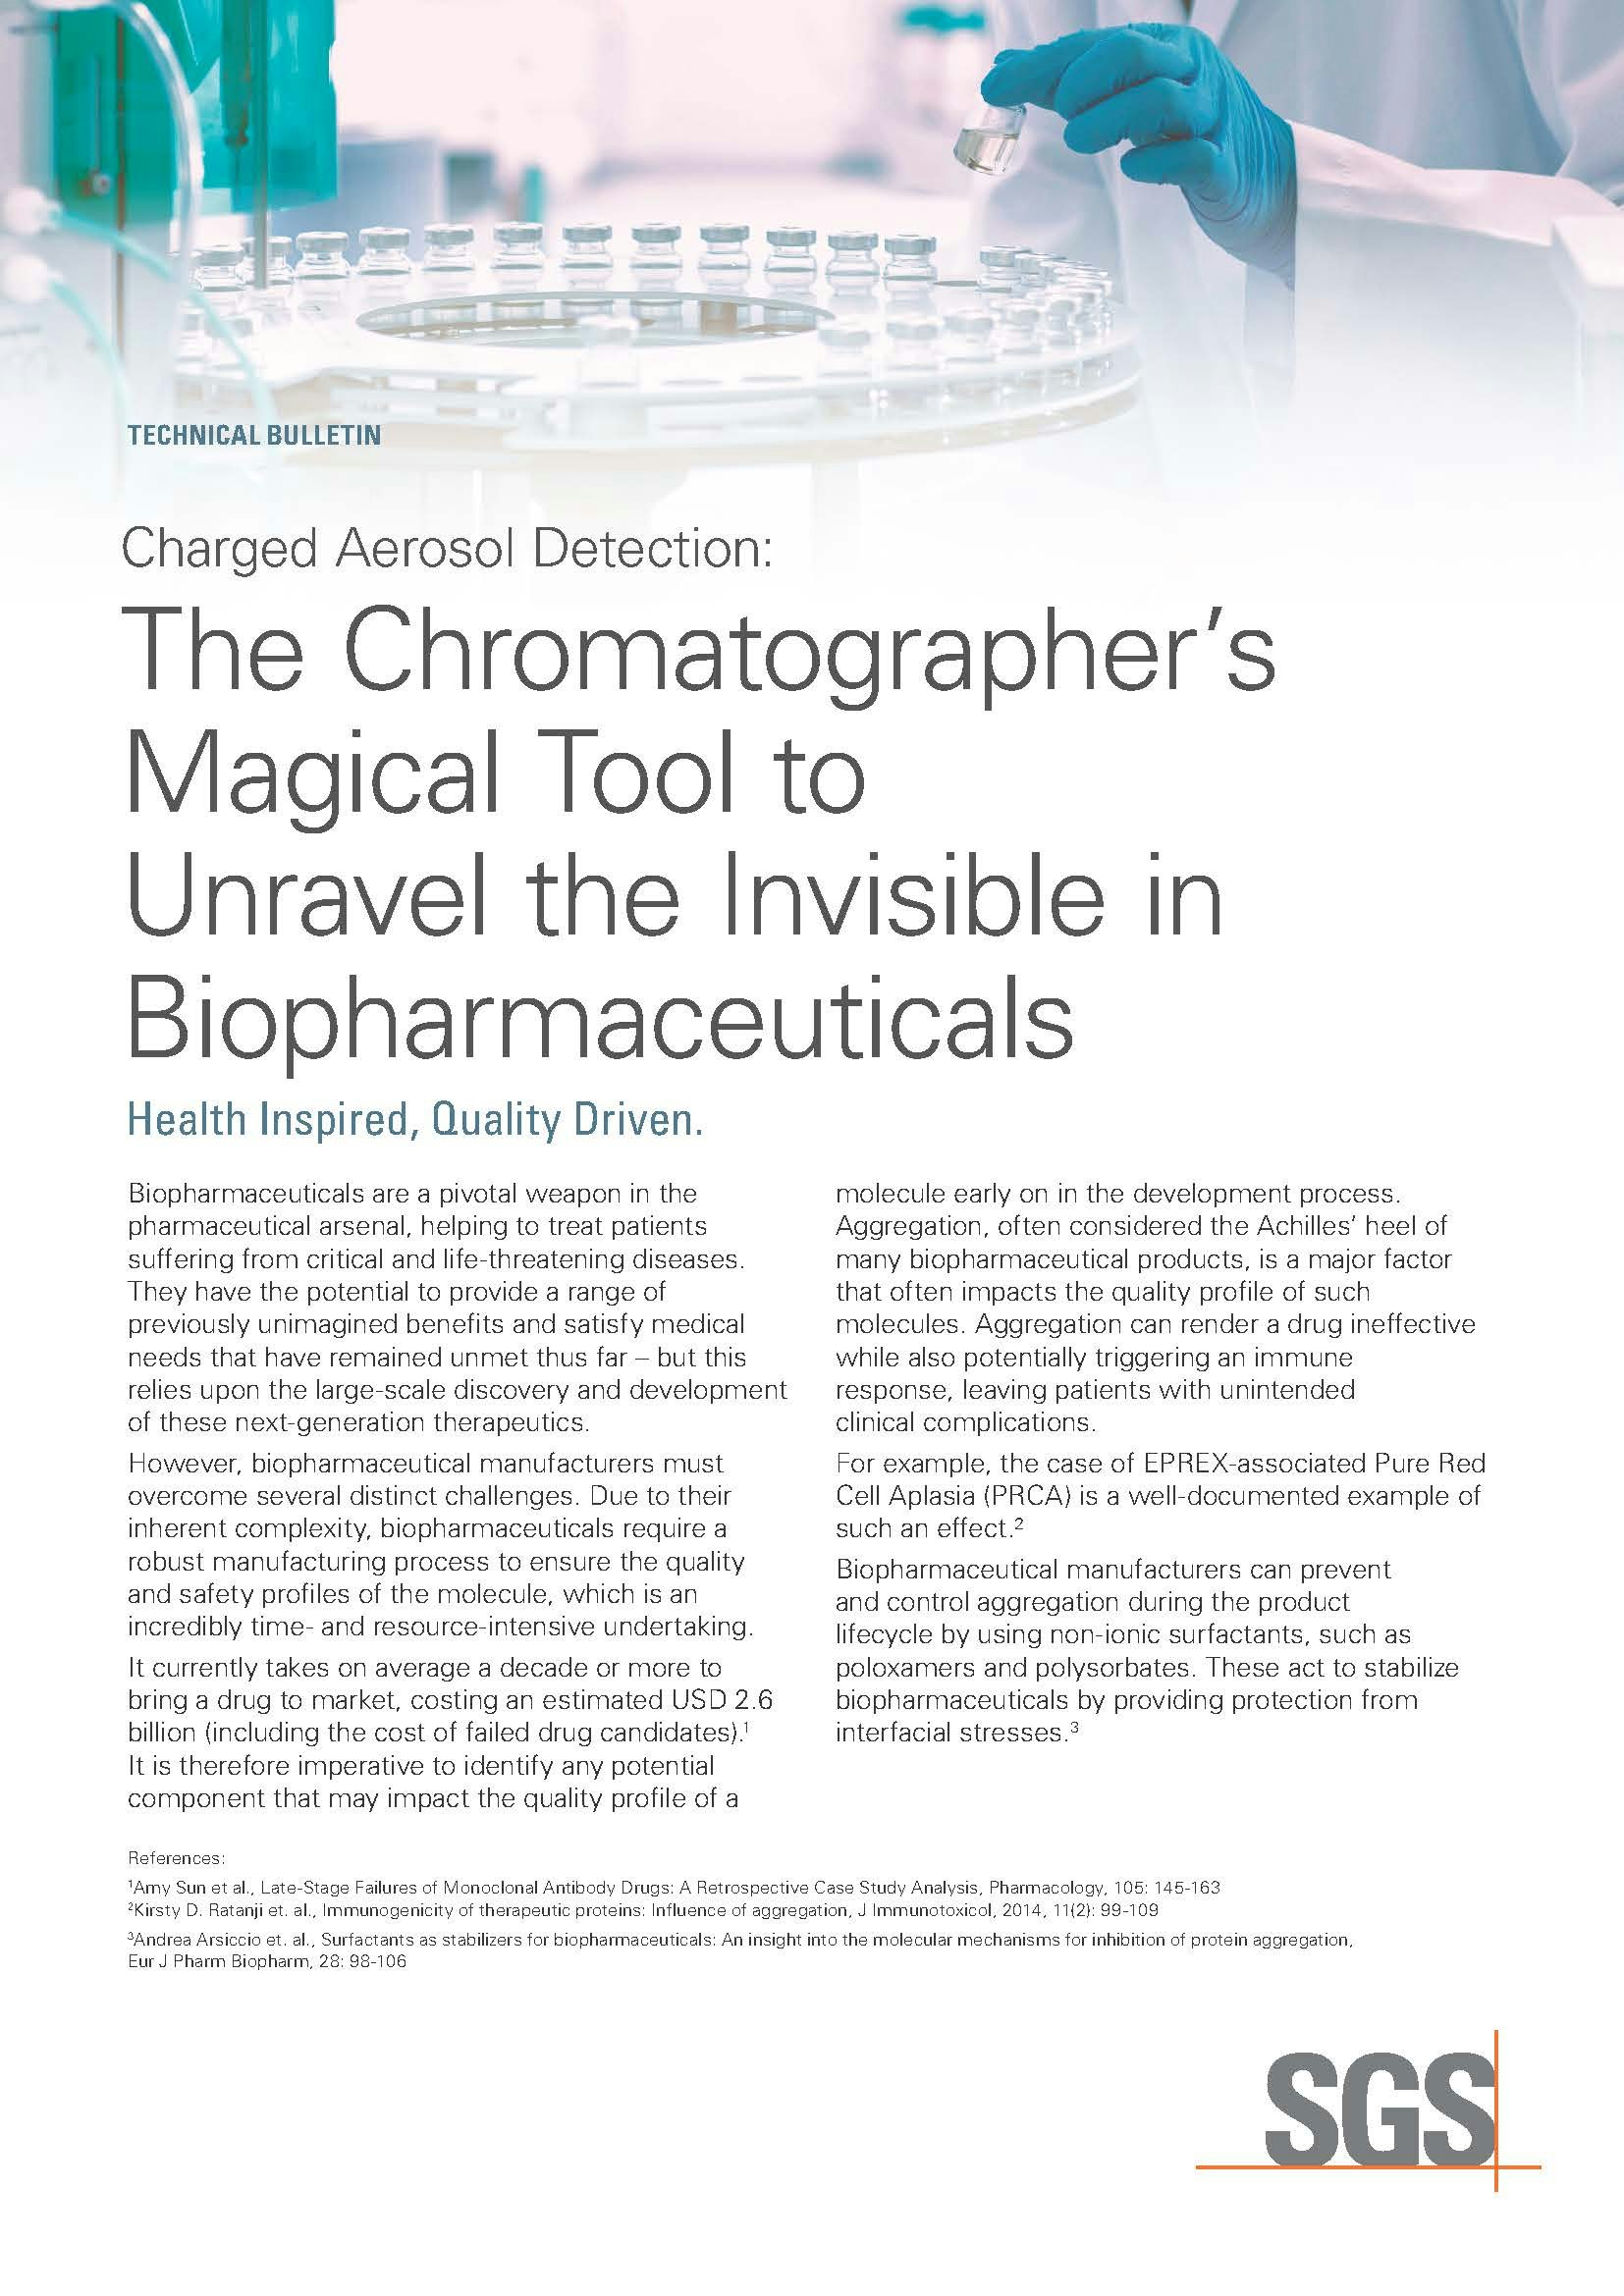 The Chromatographer’s Magical Tool to Unravel the Invisible in Biopharmaceuticals